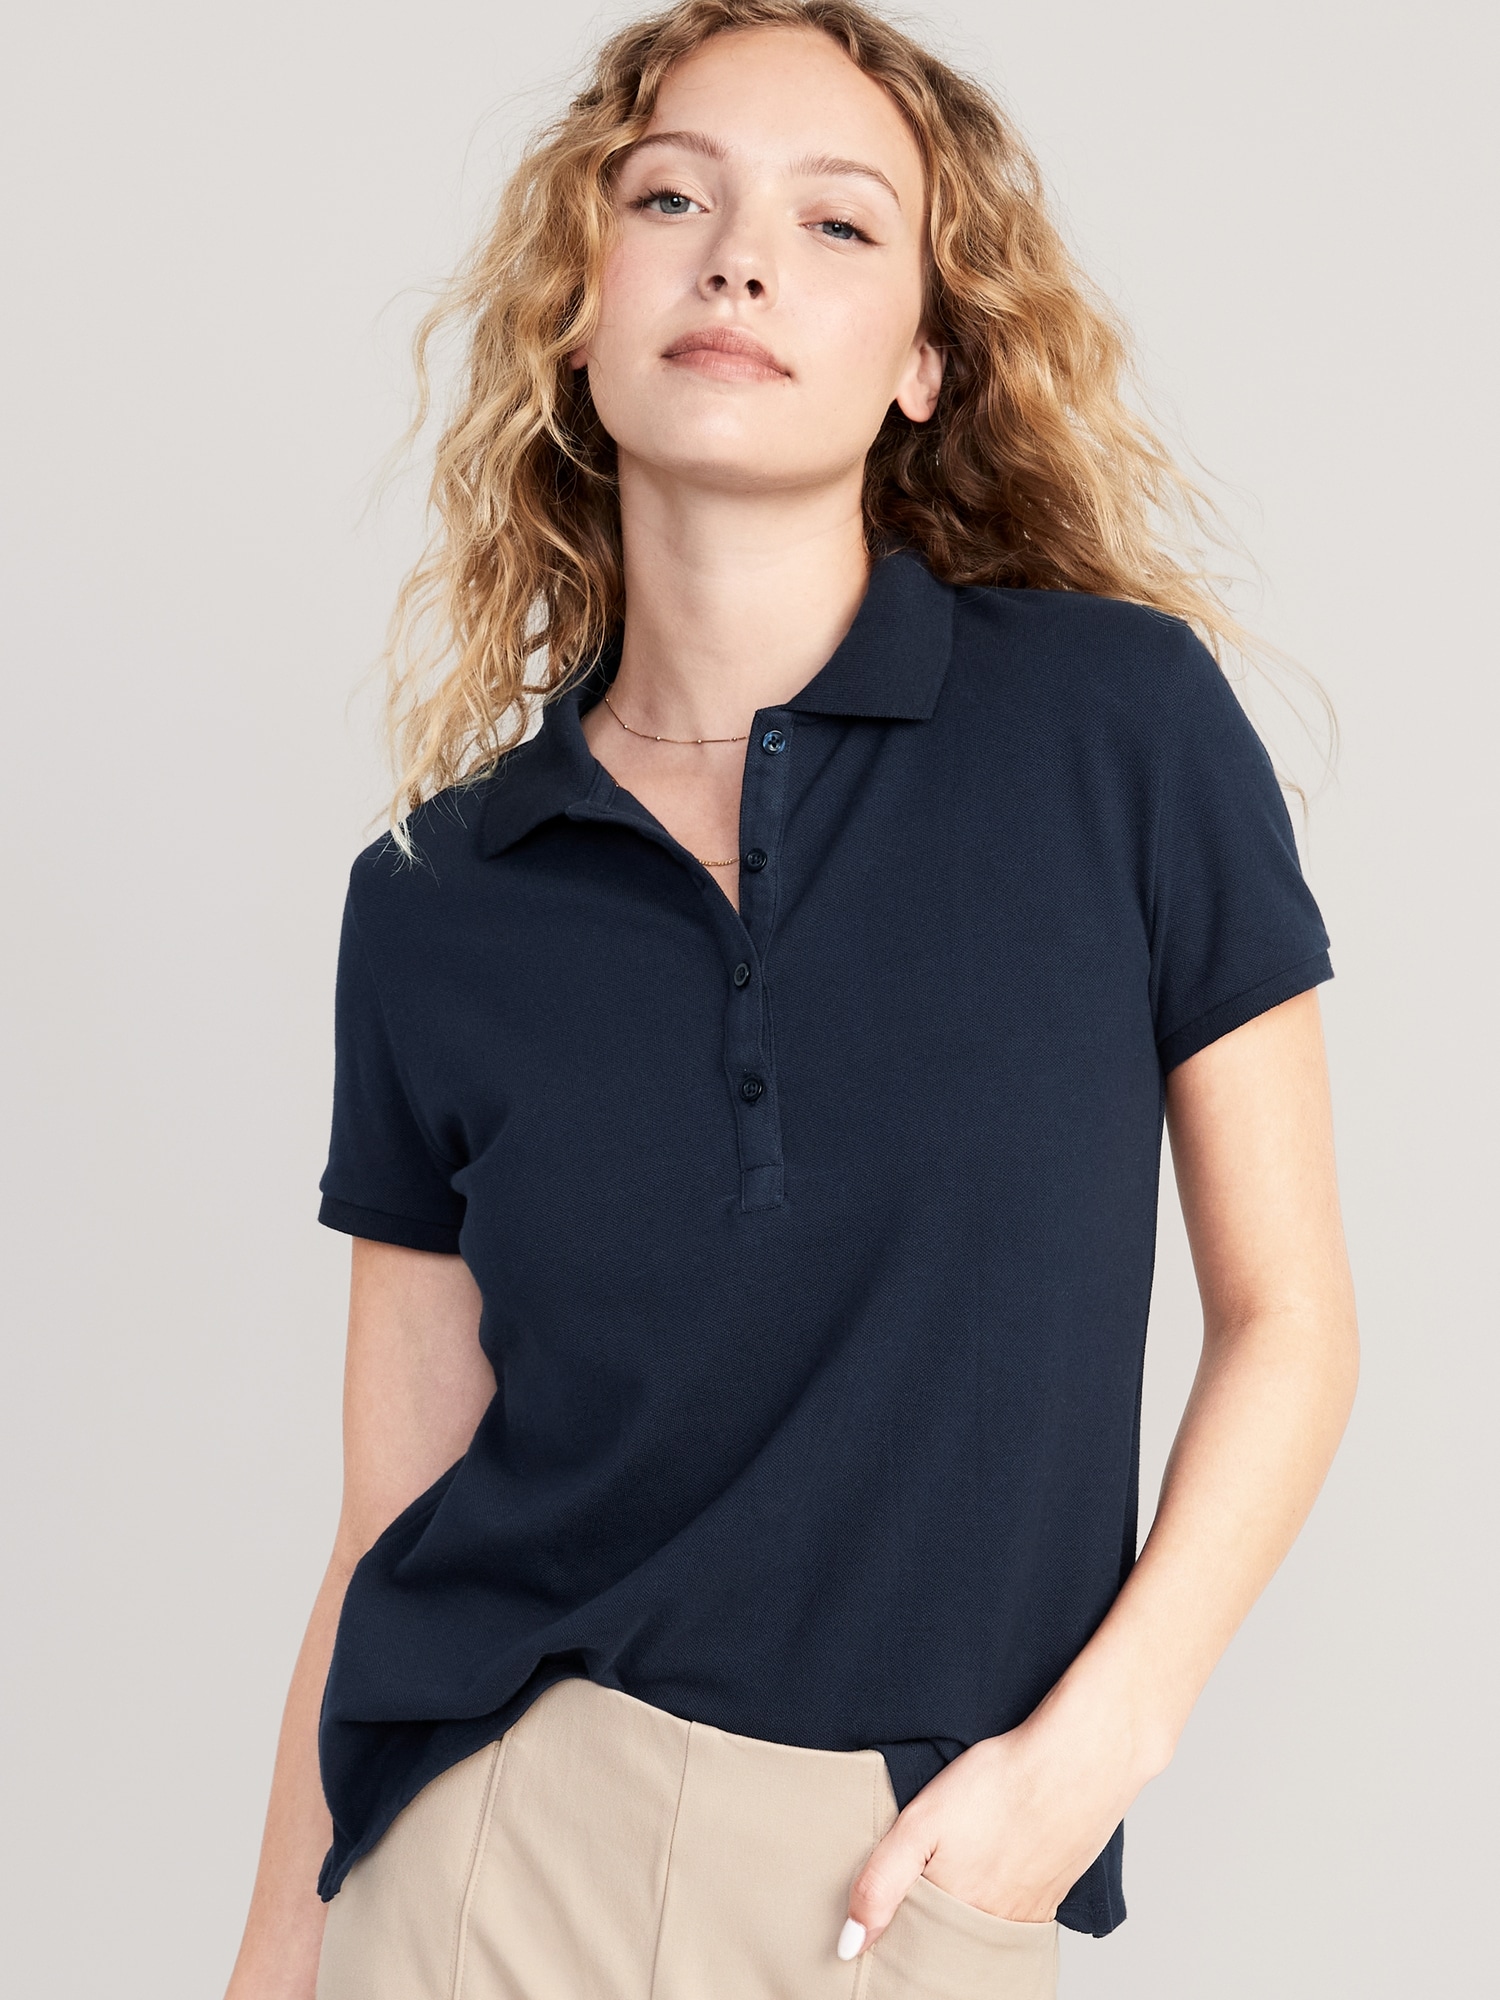 Women\'s Athletic Shirts | Navy Polo Old